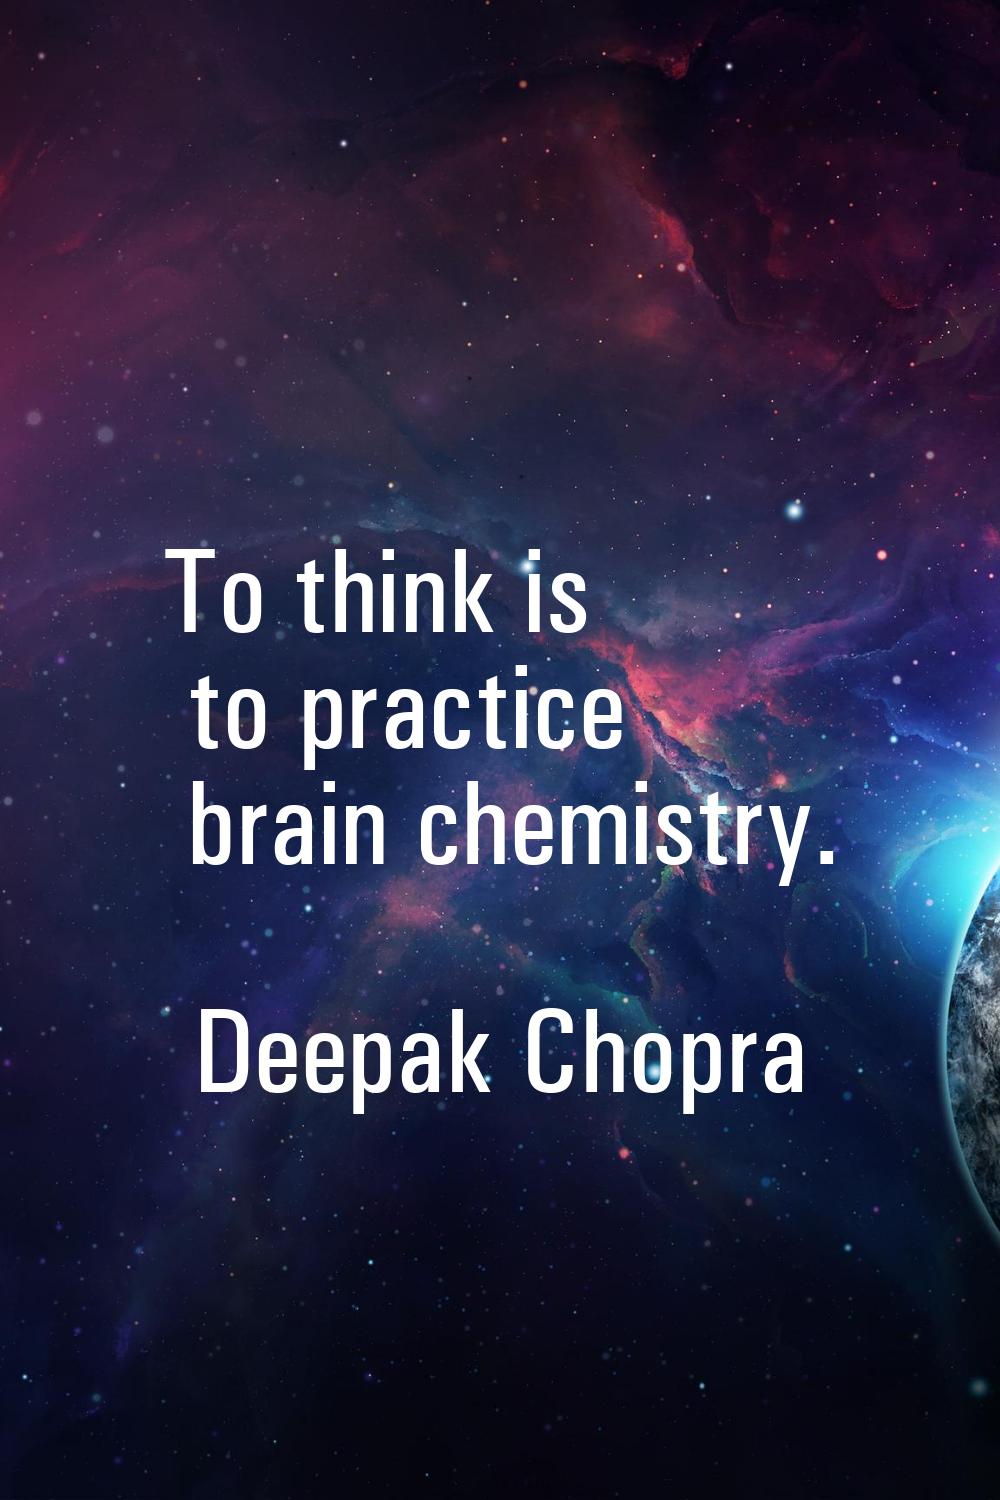 To think is to practice brain chemistry.